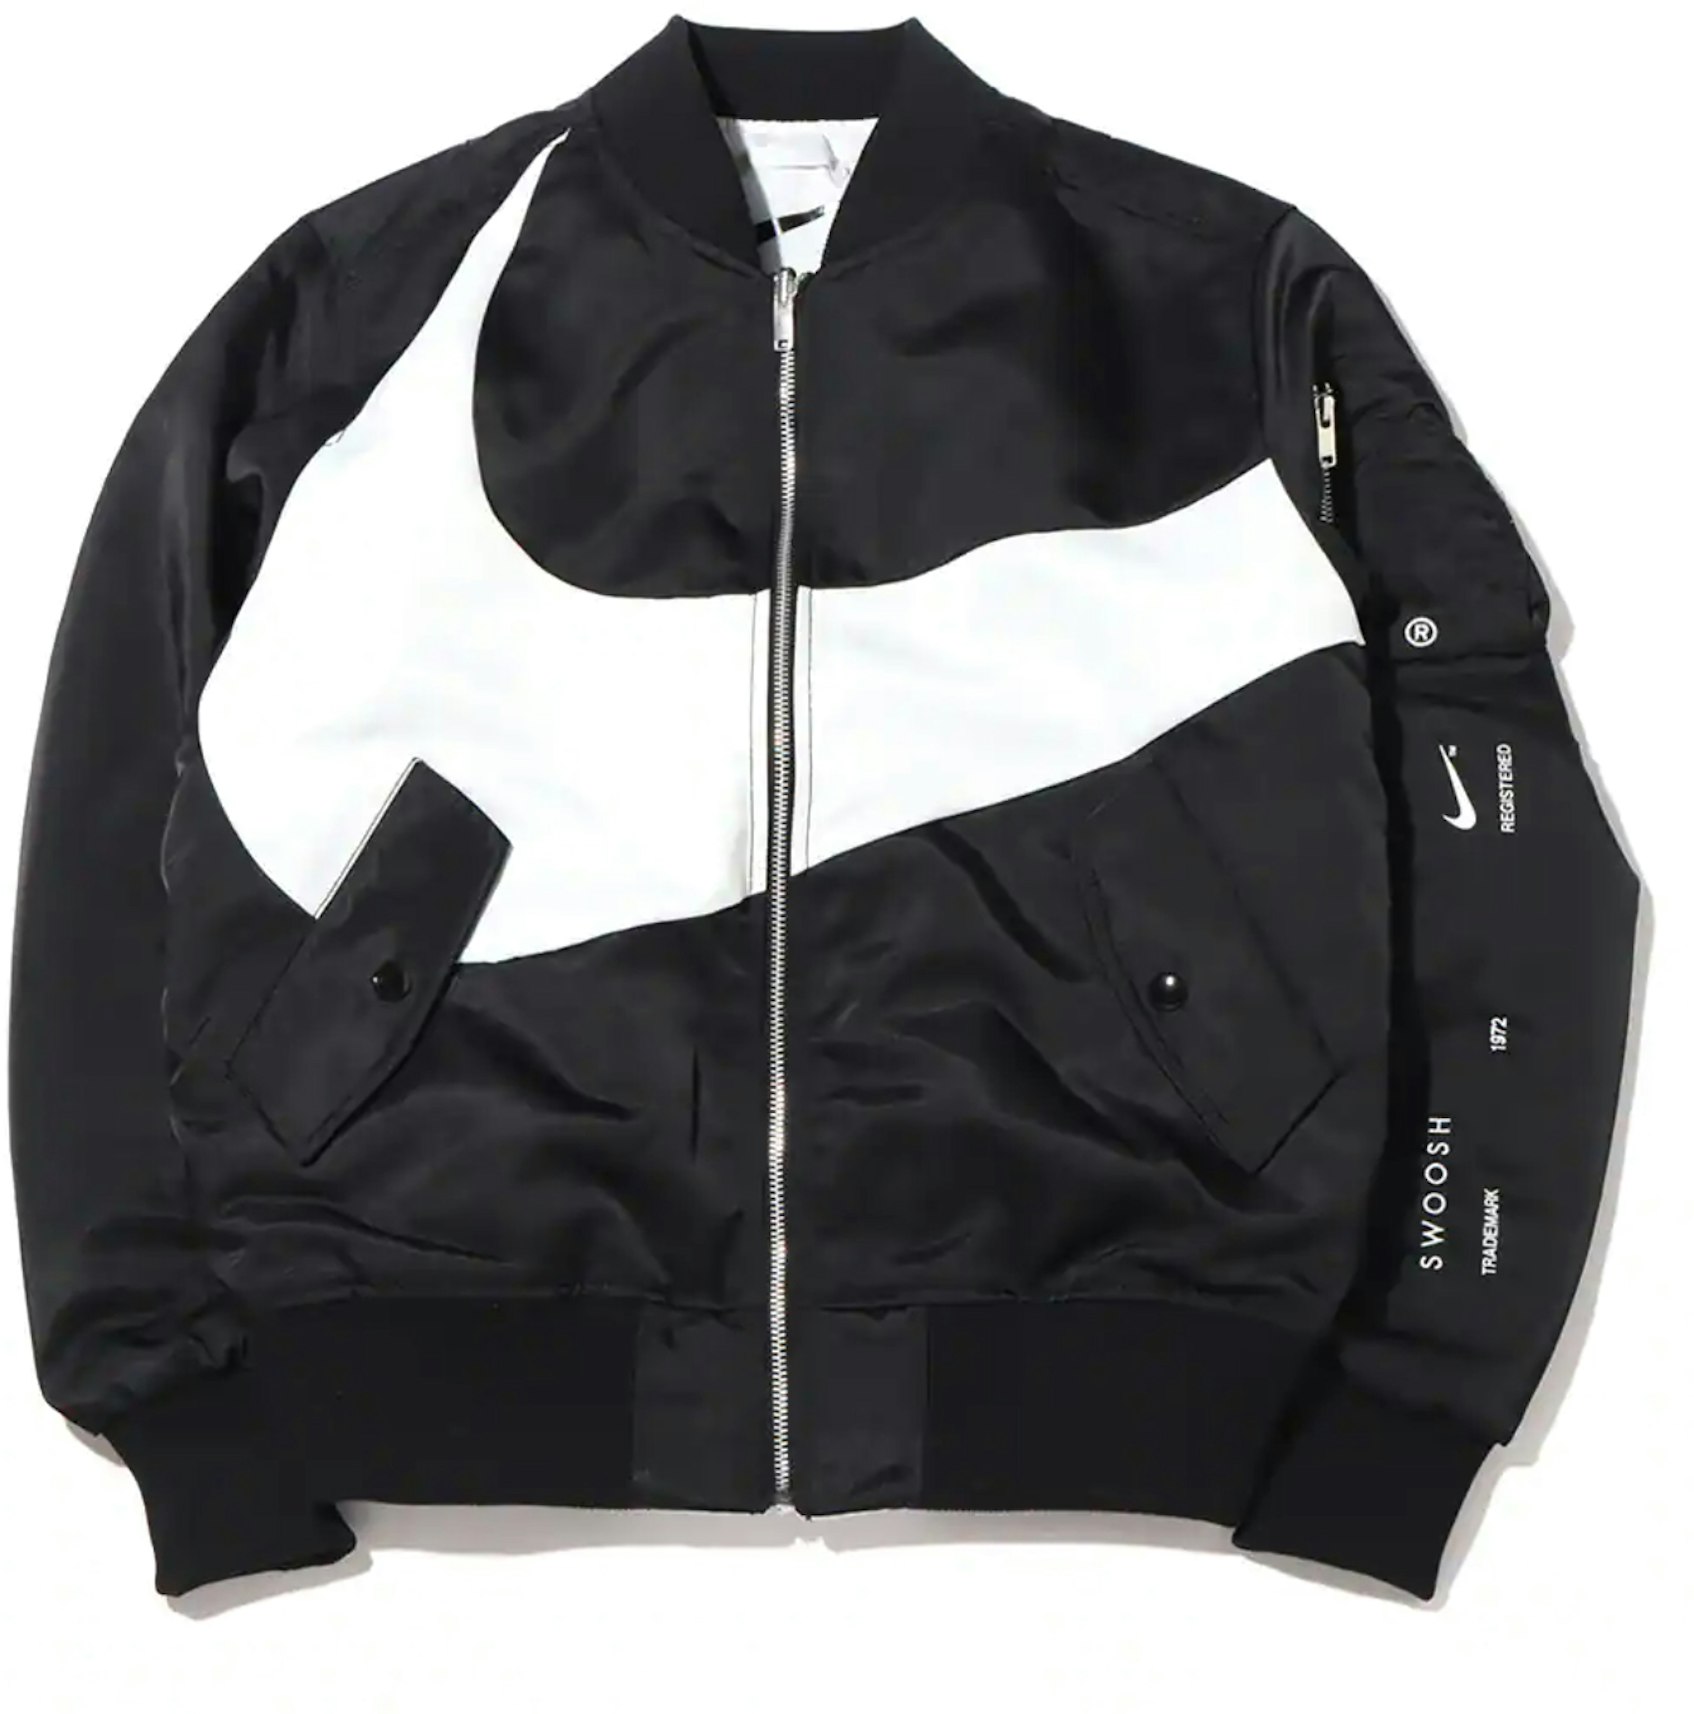 Paine Gillic Bedachtzaam jam Nike Therma-FIT Synthetic Phil Reversible Bomber Jacket (Asia Sizing) Black  - FW21 Men's - US